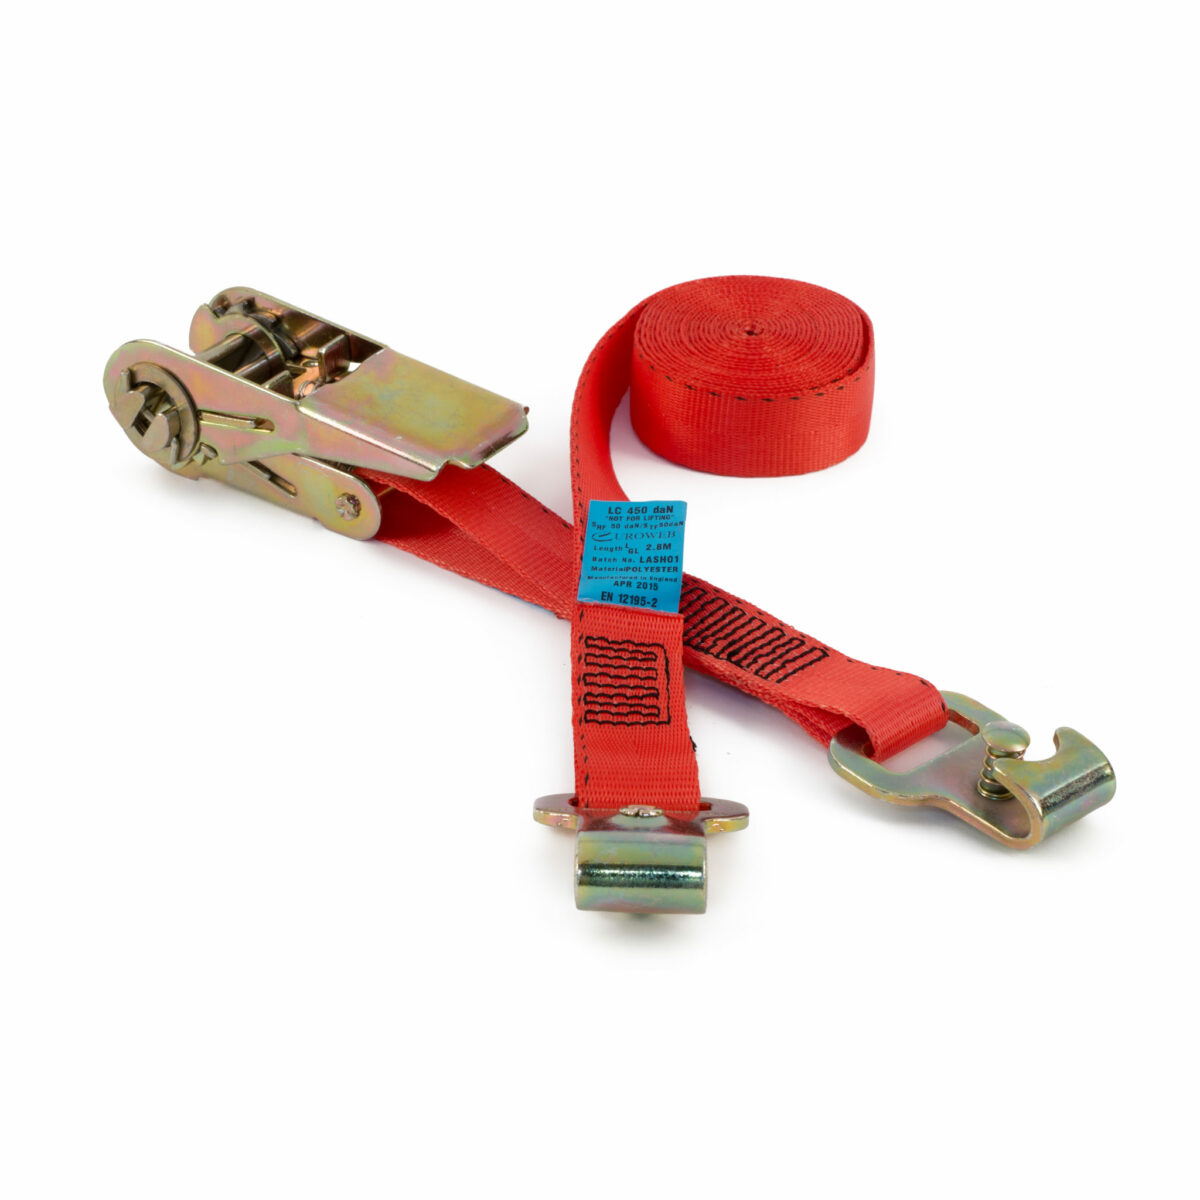 25mm Ratchet Straps with Press Hook incorporating Safety Catch